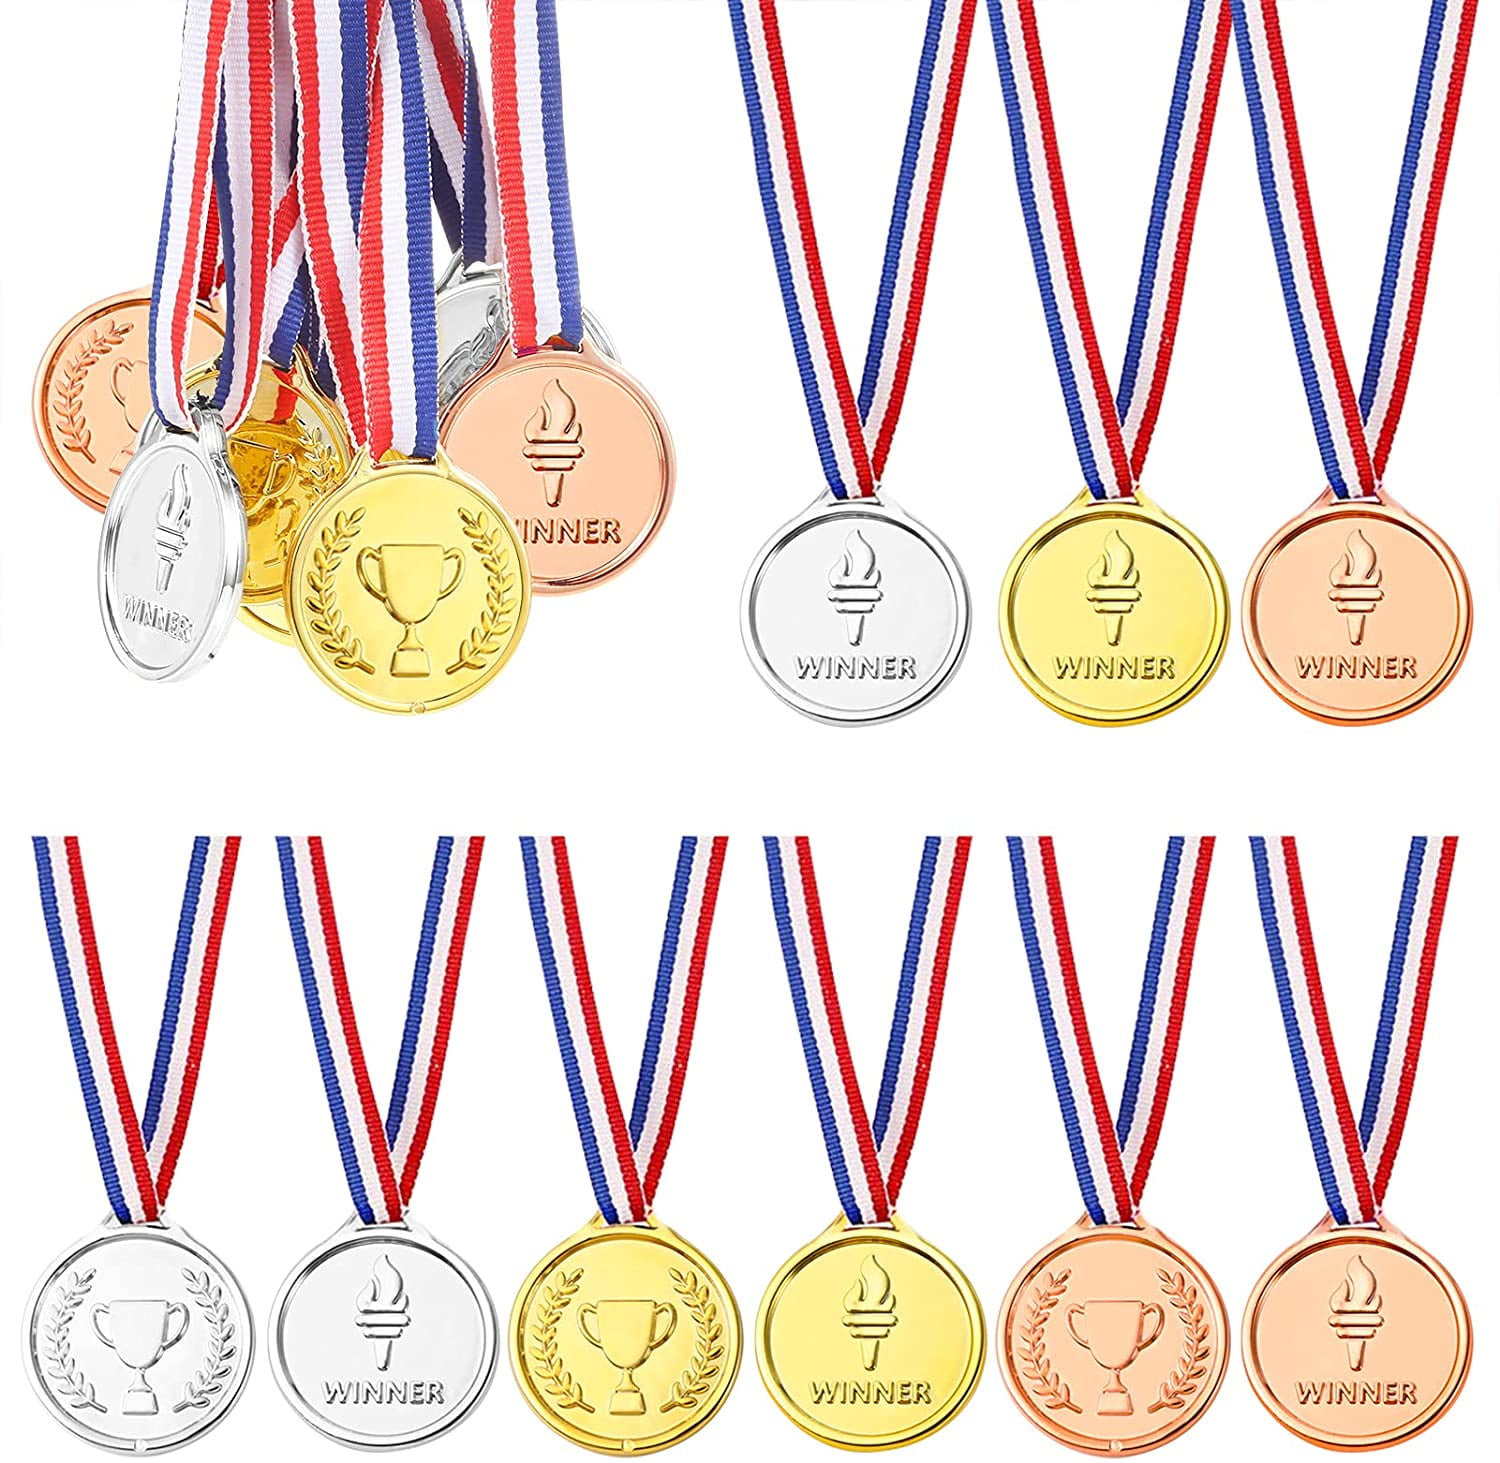 Party Favors and Awards Pllieay 2 Inch Winner Medals Gold Award Medals Gold Prizes for Sports Competitions 